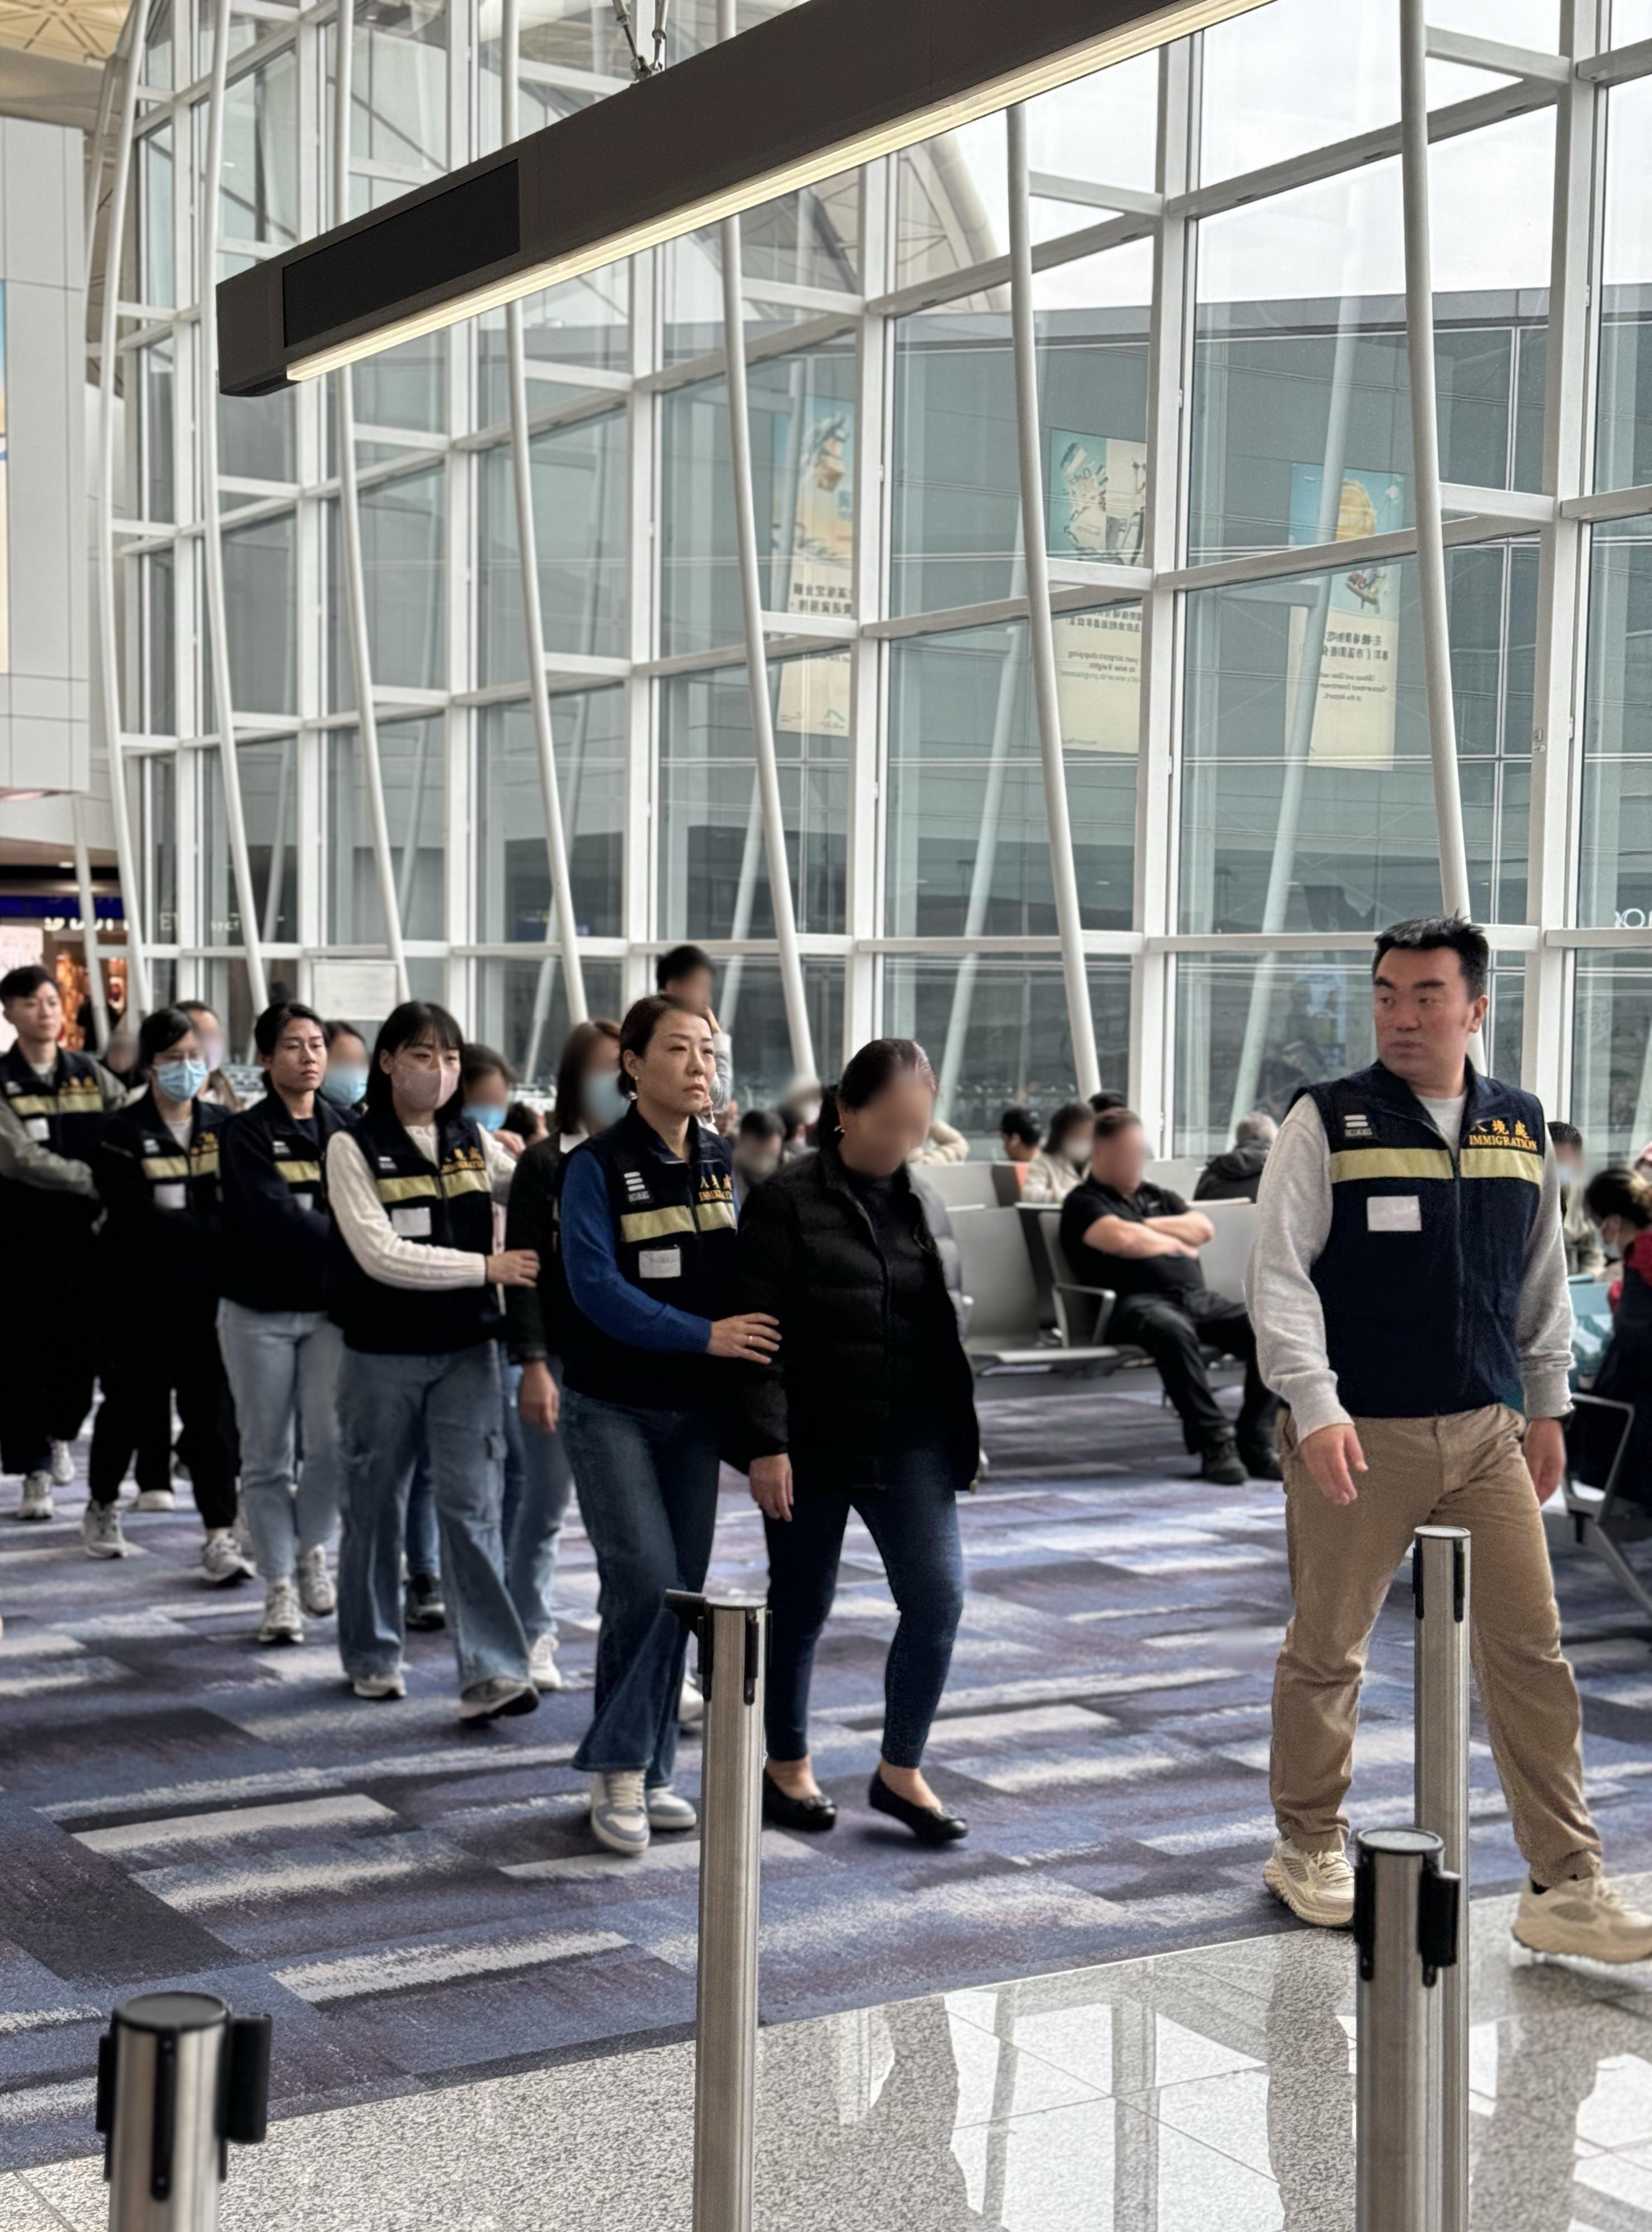 The Immigration Department (ImmD) carried out a repatriation operation today (February 27). A total of 23 Vietnamese illegal immigrants were repatriated to Vietnam. Photo shows removees being escorted by ImmD officers to depart from Hong Kong.